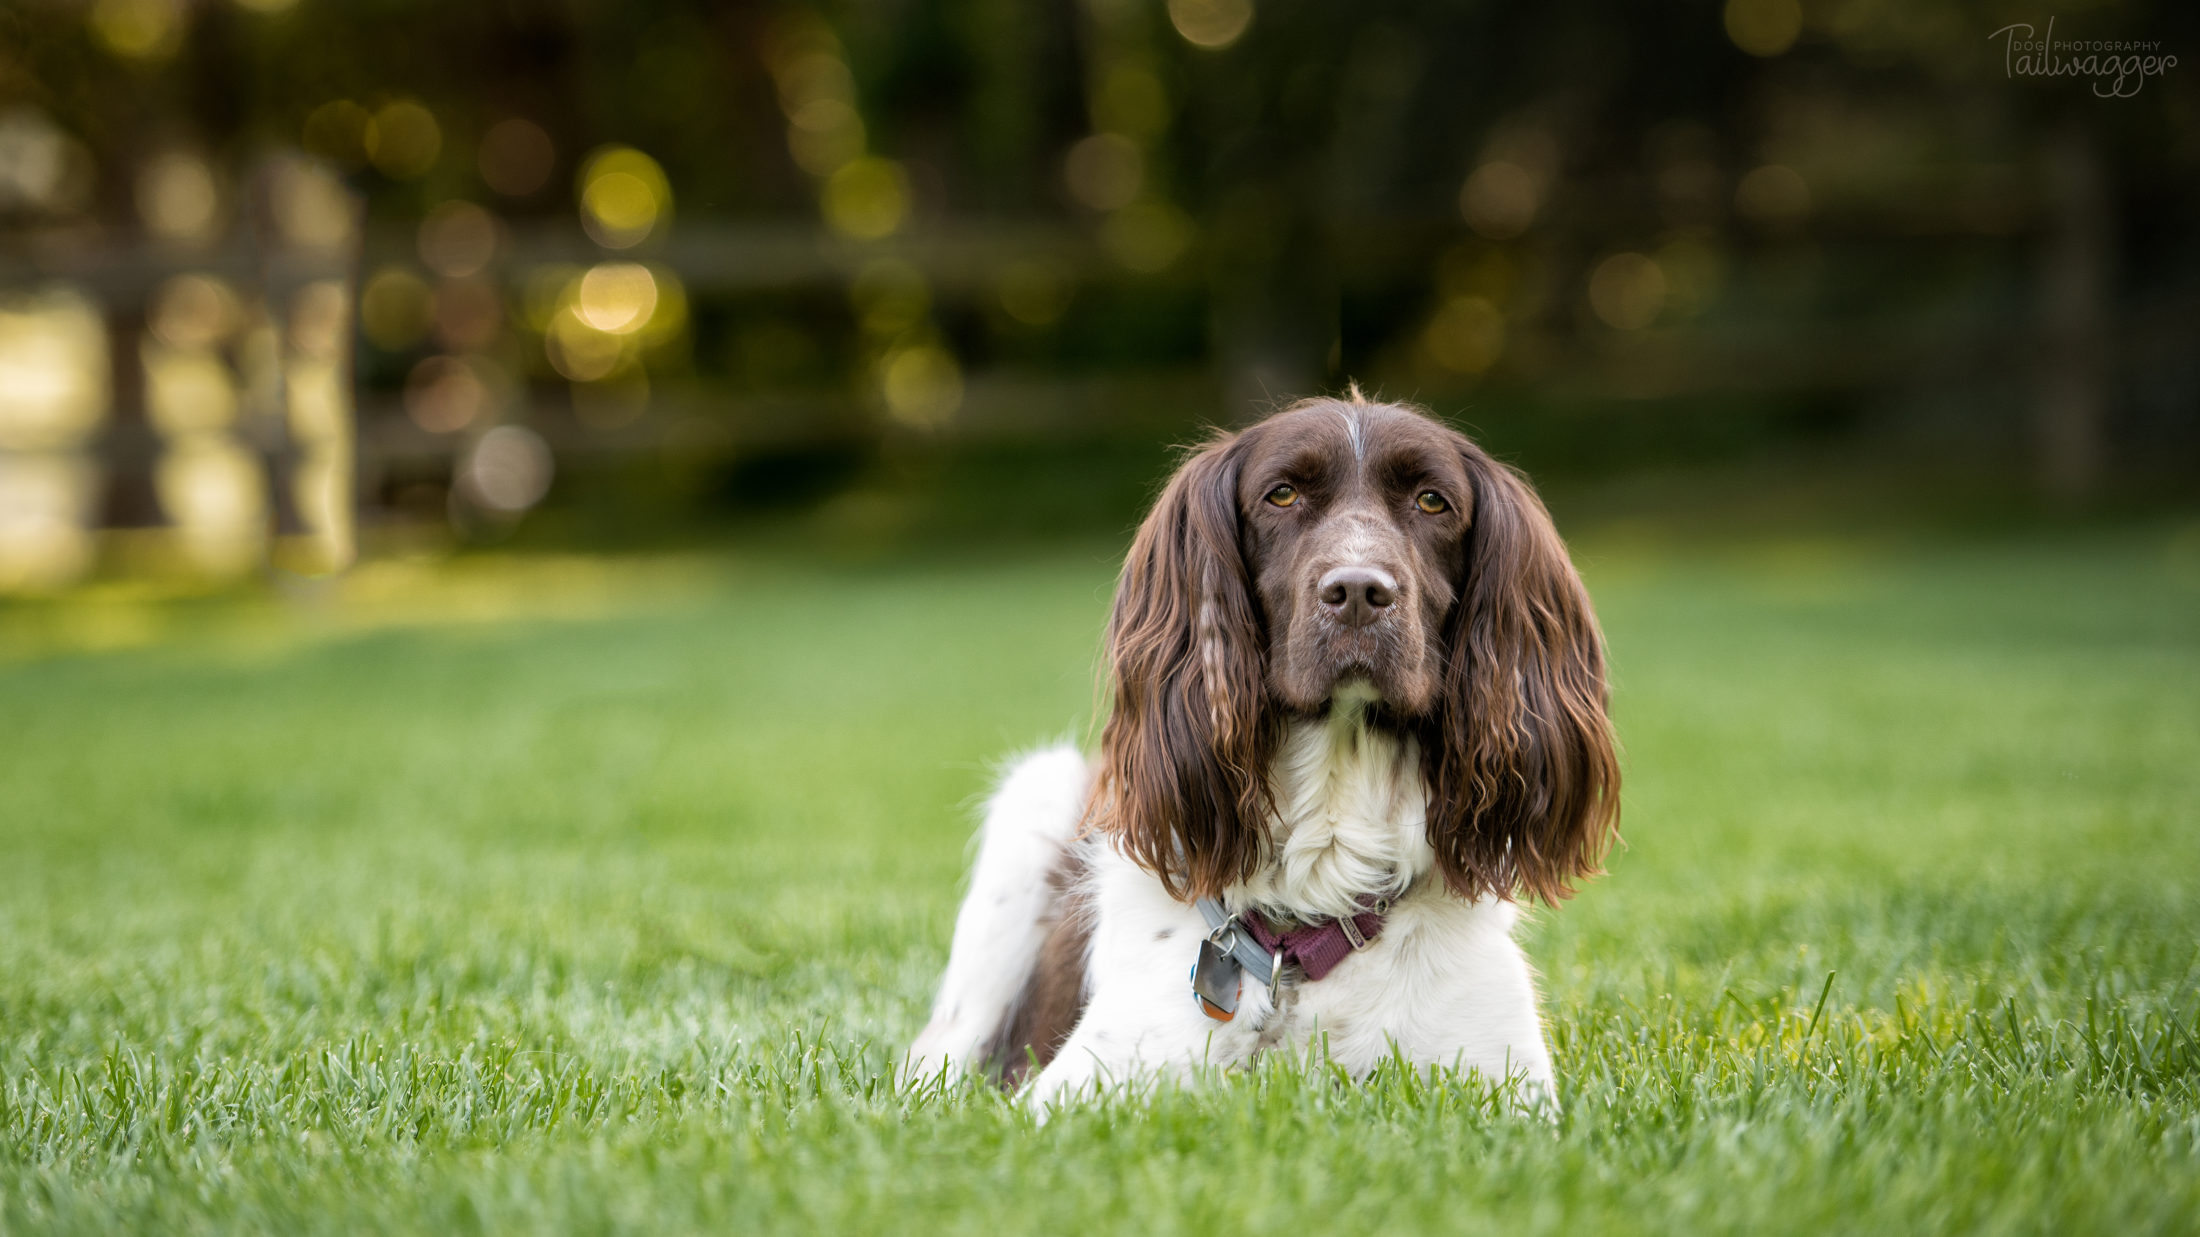 English Springer Spaniel lying in the grass with golden light in the background